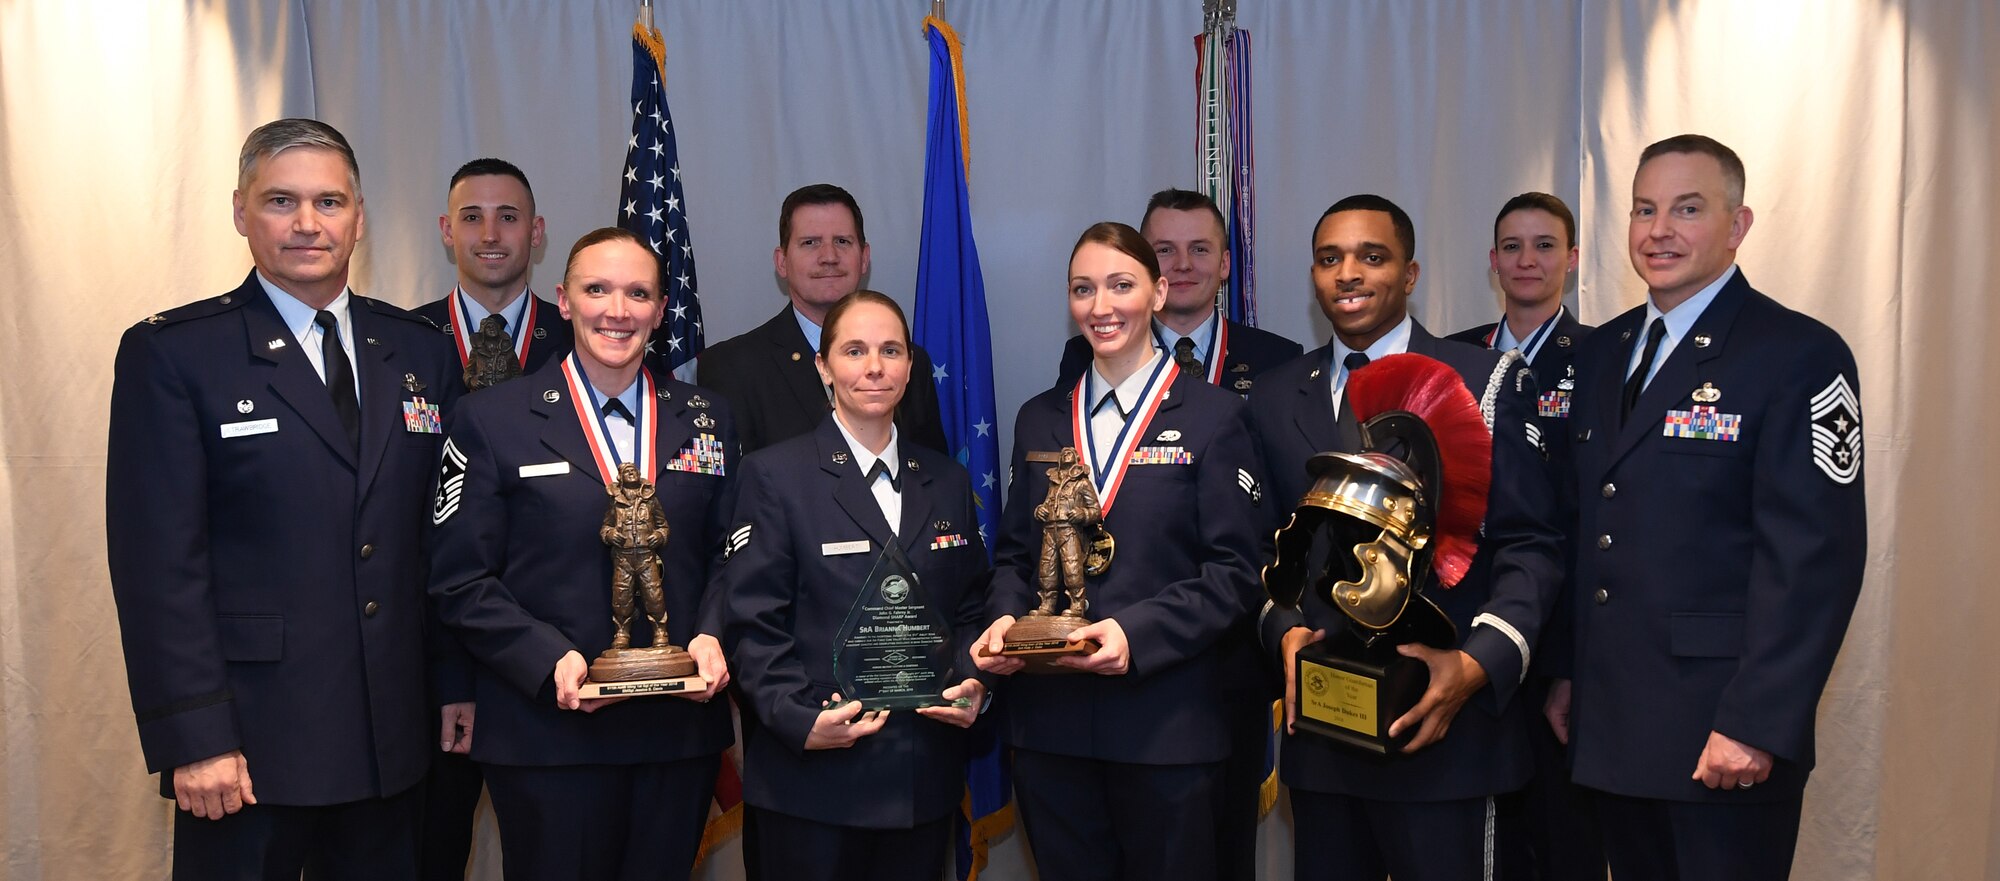 911th Airlift Wing award winners stand to be recognized with Col. Douglas N. Strawbridge, commander of the 911th AW, and Chief Master Sgt. Christopher D. Neitzel, command chief of the 911th AW, during the 911th AW Annual Award Ceremony at the Pittsburgh International Airport Air Reserve Station Pennsylvania, March 2, 2019. The 2018 Awards Ceremony recognizes Airmen that went above and beyond in their service for the year 2018. (U.S. Air Force Photo by Senior Airman Grace Thomson)